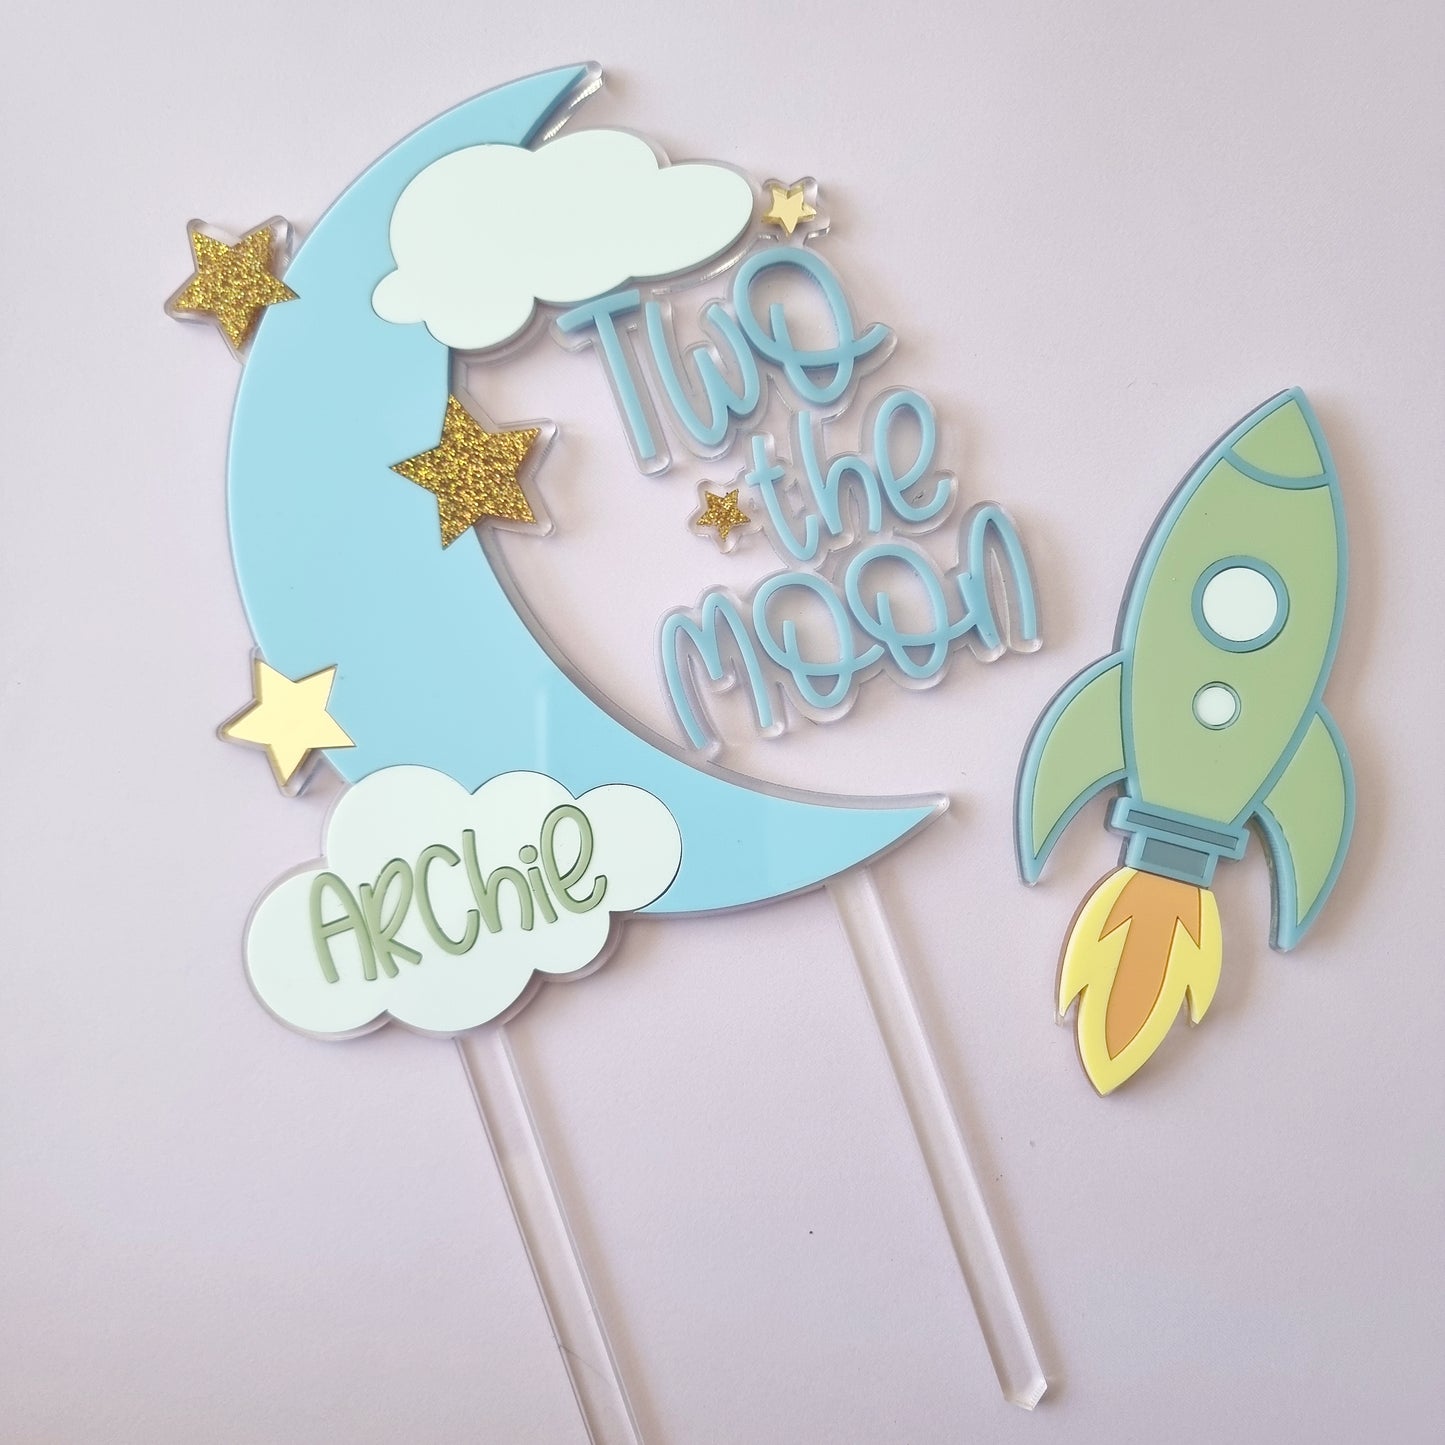 Personalised Acrylic Two The Moon Cake topper with or without Rocket add on.